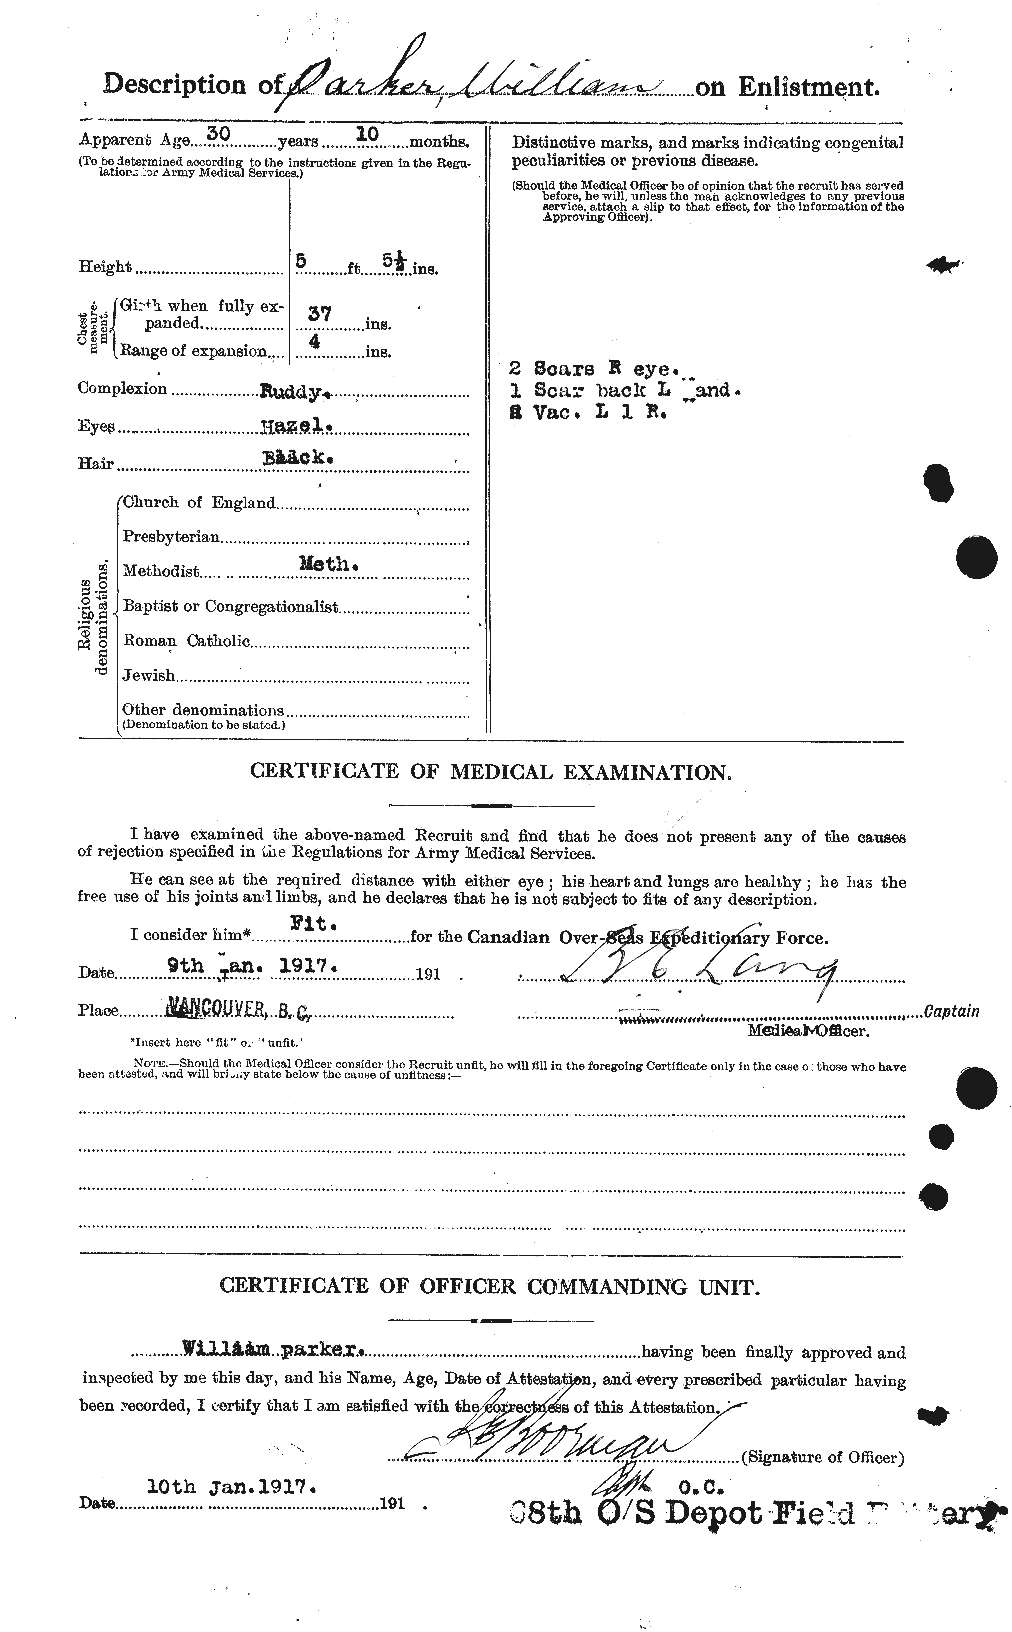 Personnel Records of the First World War - CEF 565722b